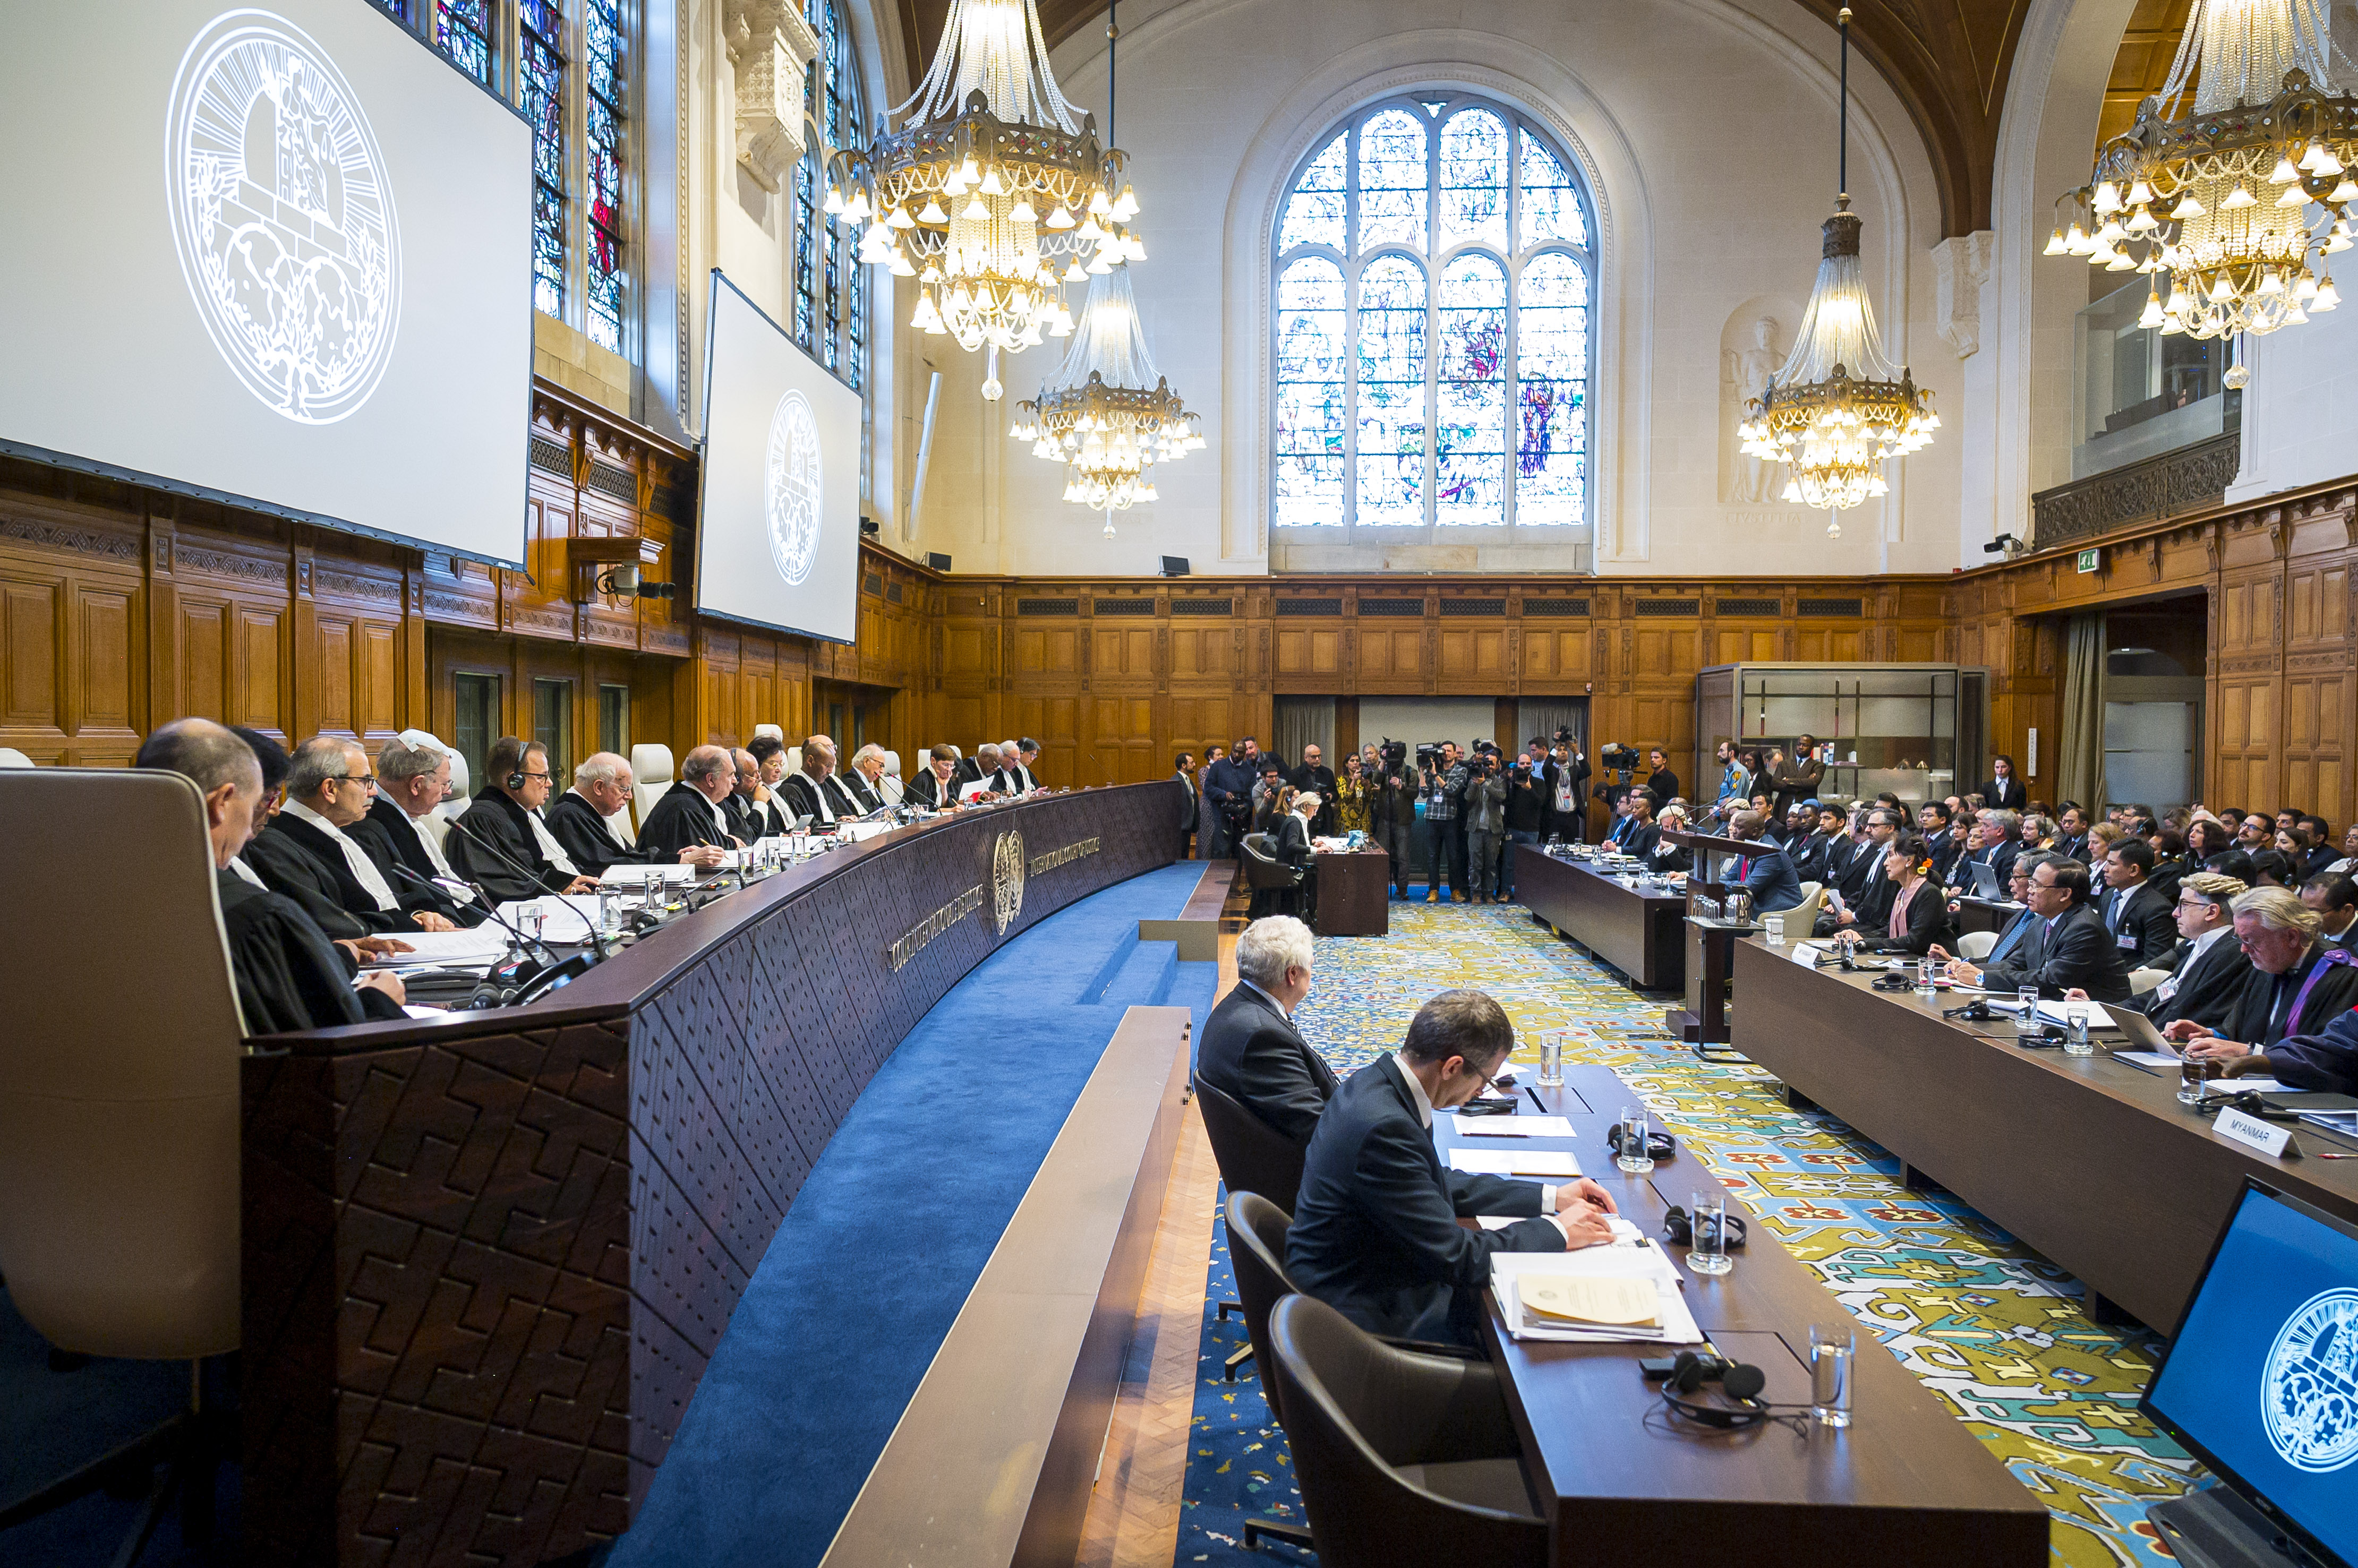 ICJ General Presentation Gallery (ICJ Film, Official Picture and videos). International Court of Justice